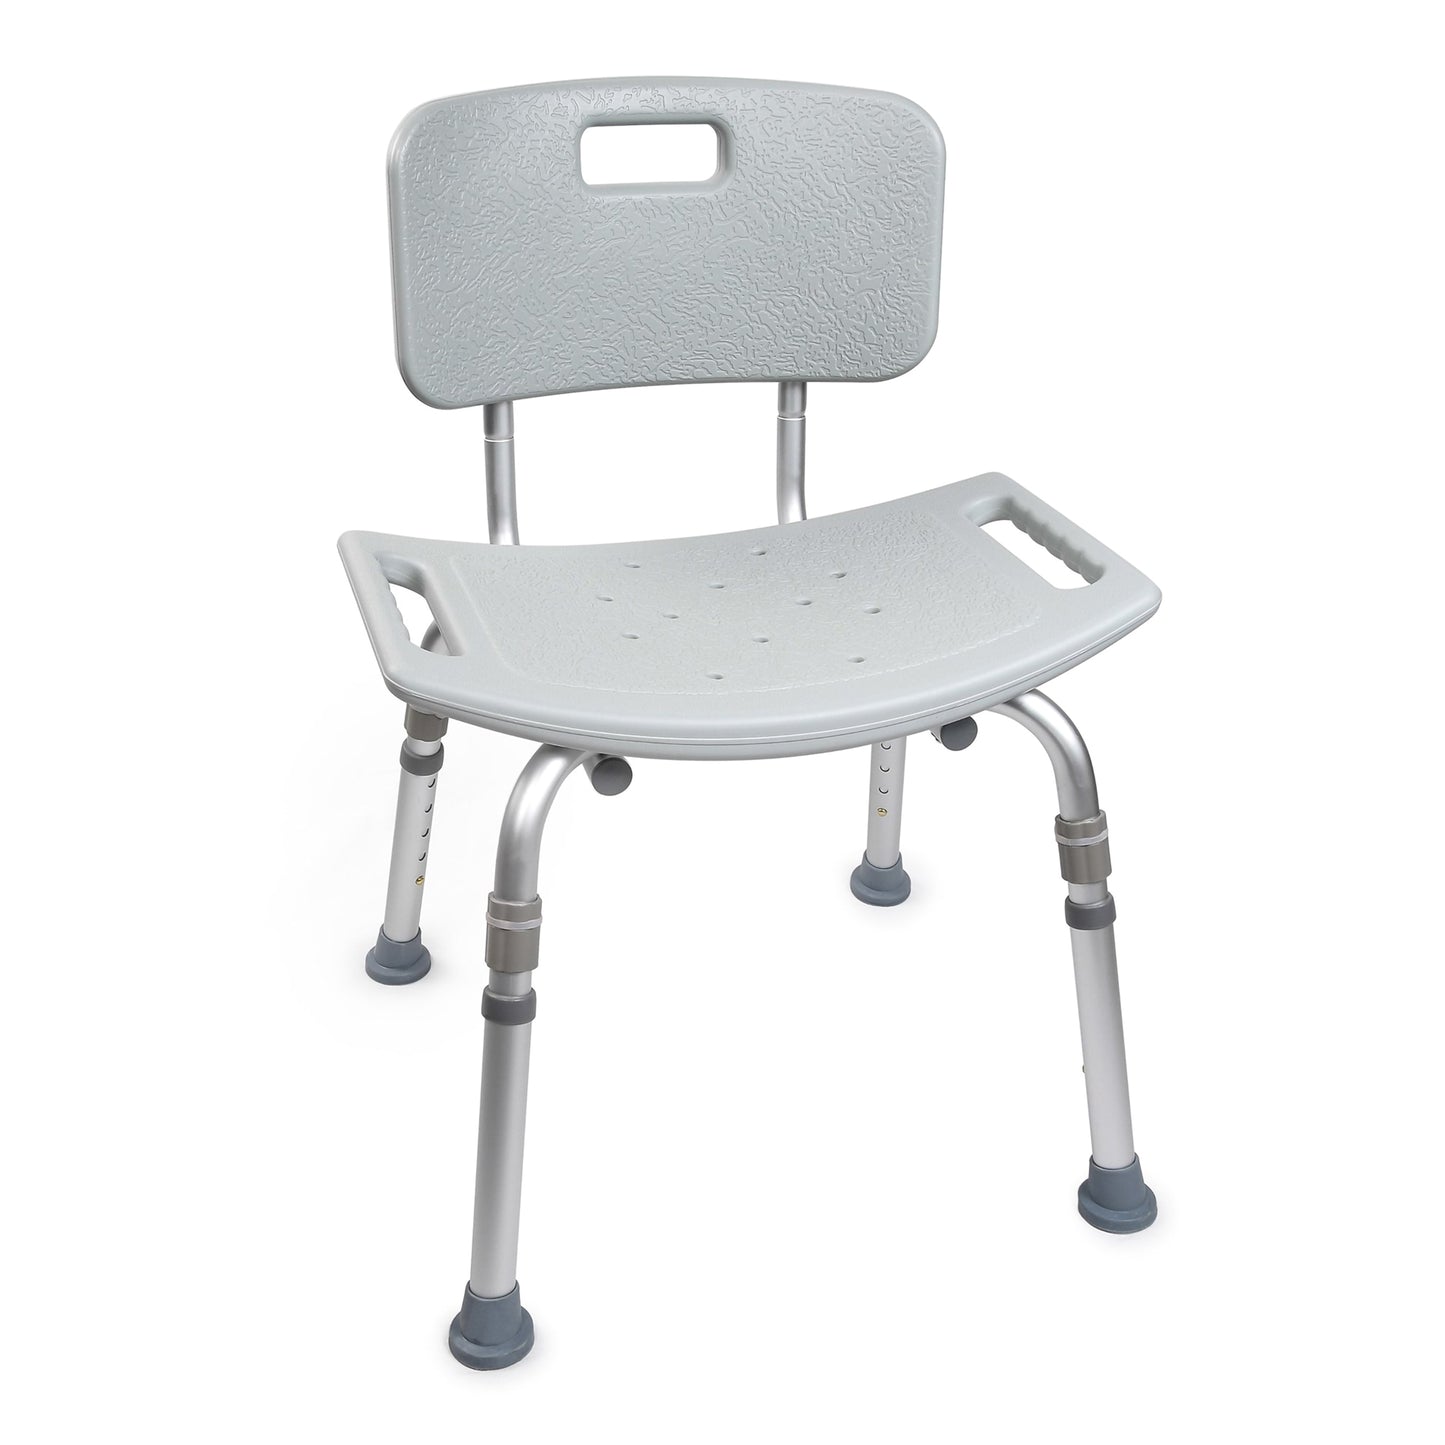 Mckesson Aluminum Bath Transfer Bench With Removable Back, Sold As 1/Each Mckesson 146-12202Kd-1